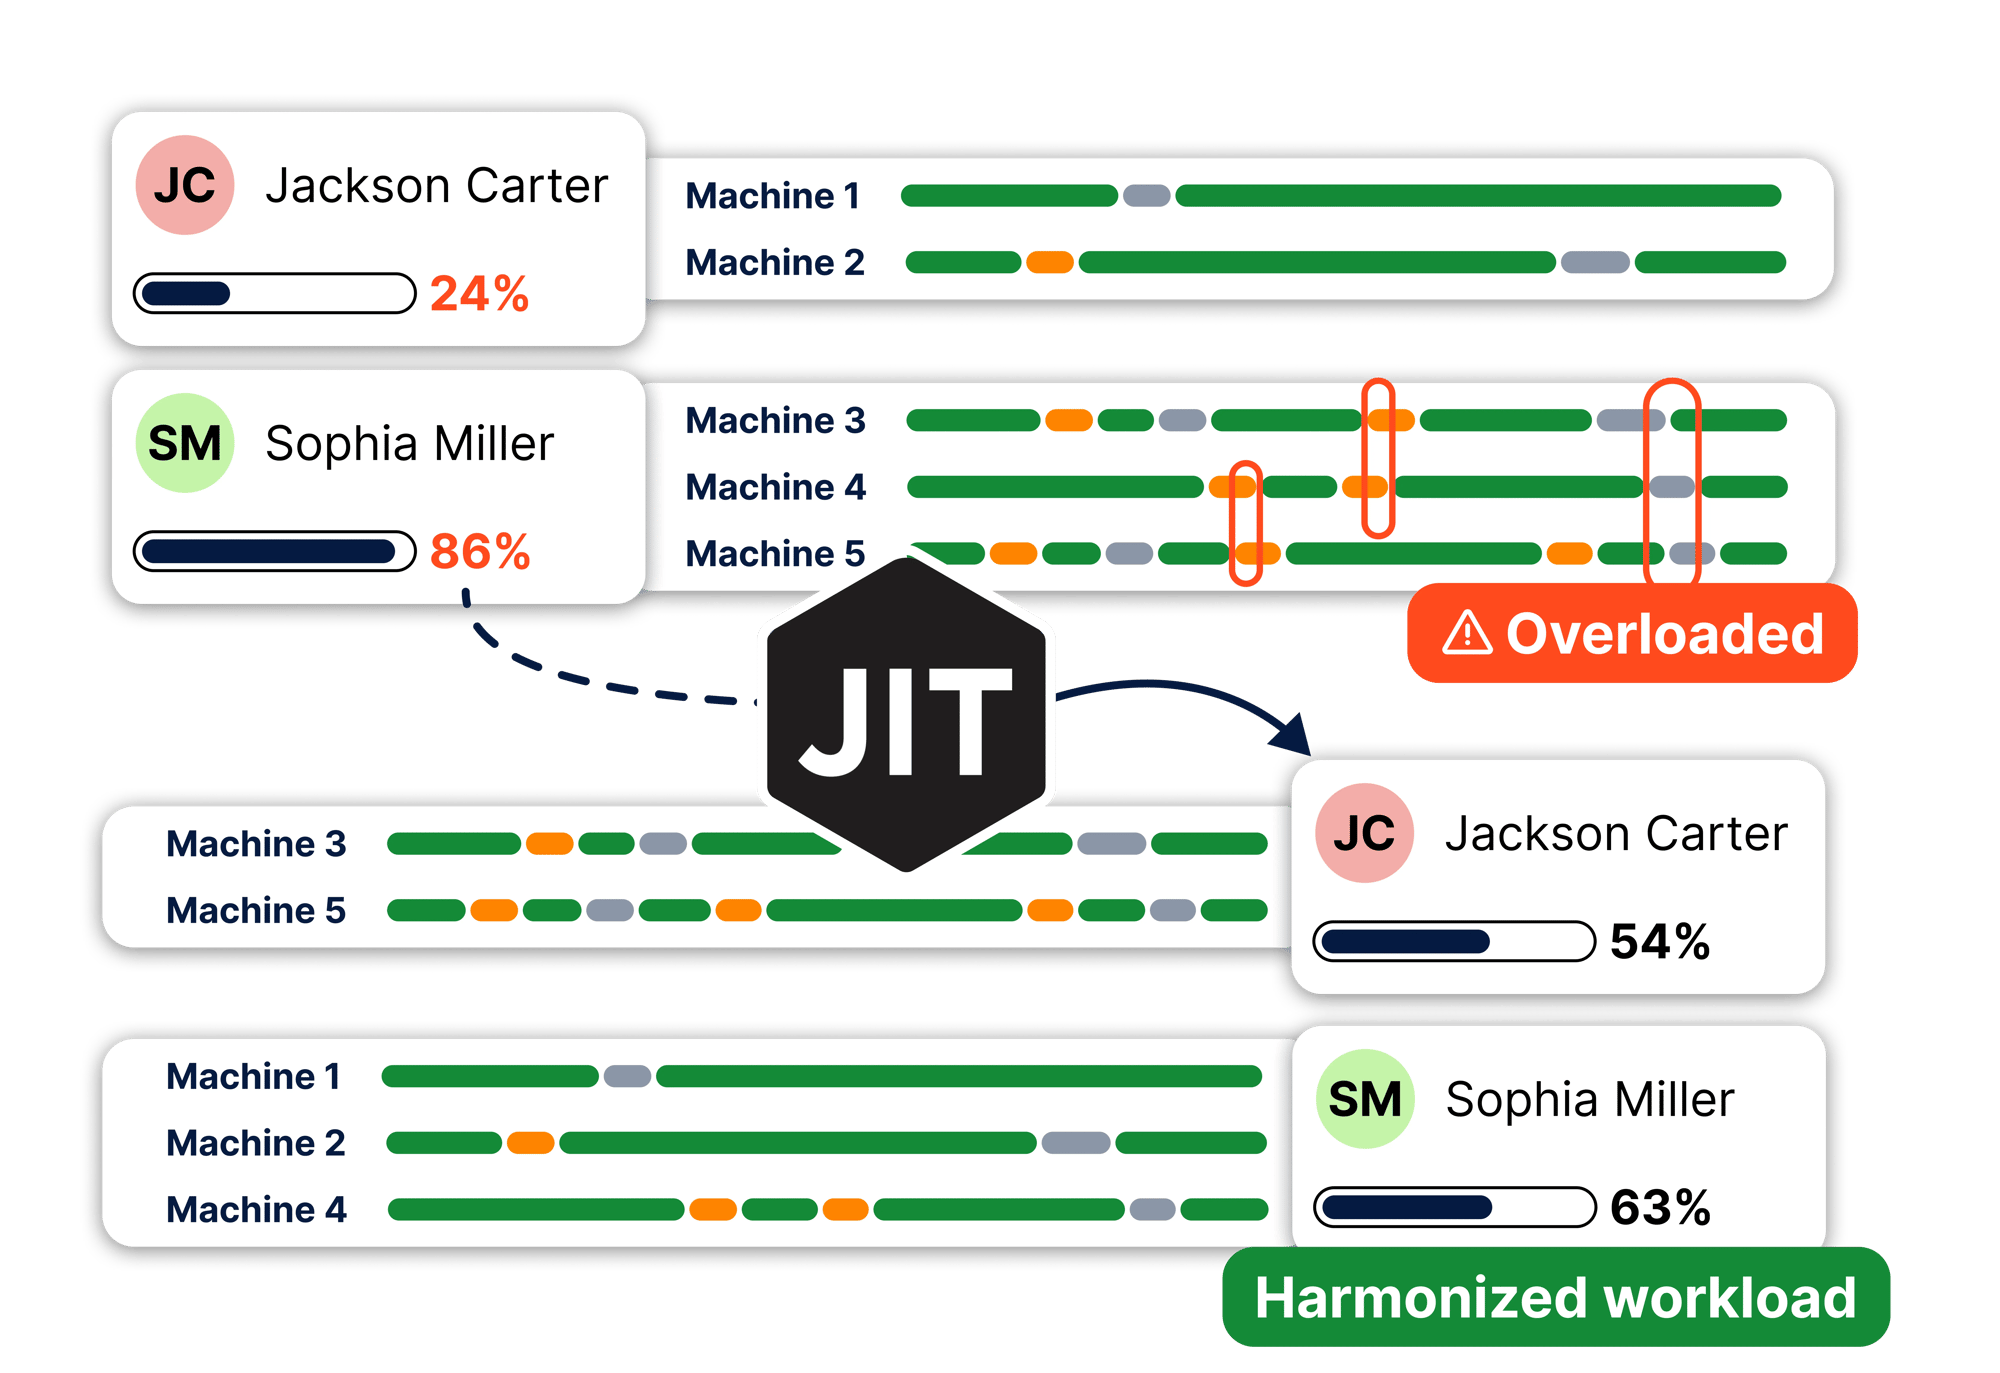 Case where an operator is overloaded and another is under-loaded. JITbase helps harmonize the workload